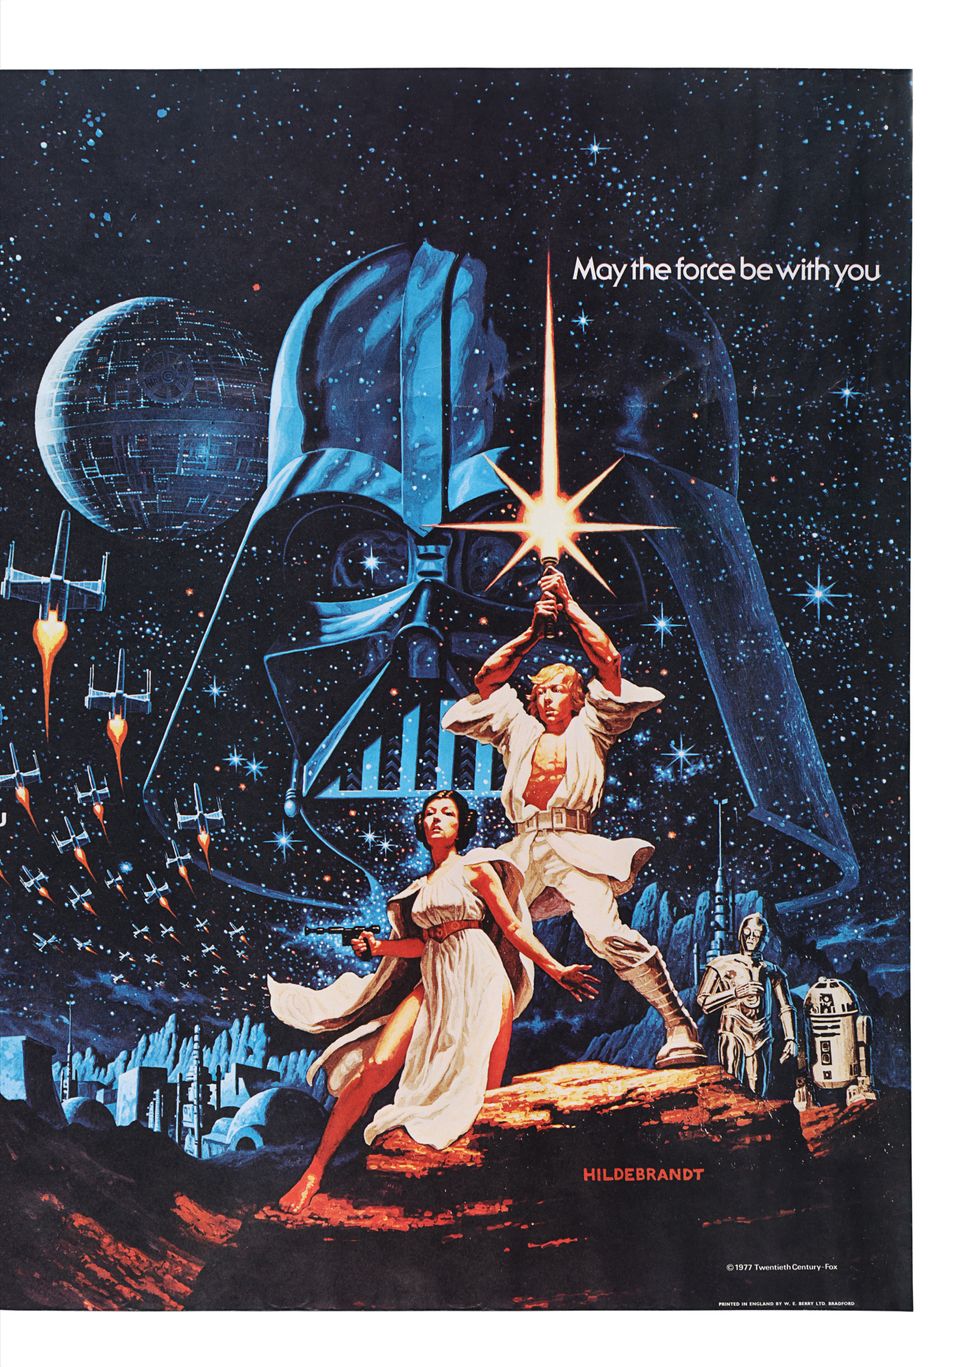 Rare Star Wars poster to go under the hammer in aid of Ukraine